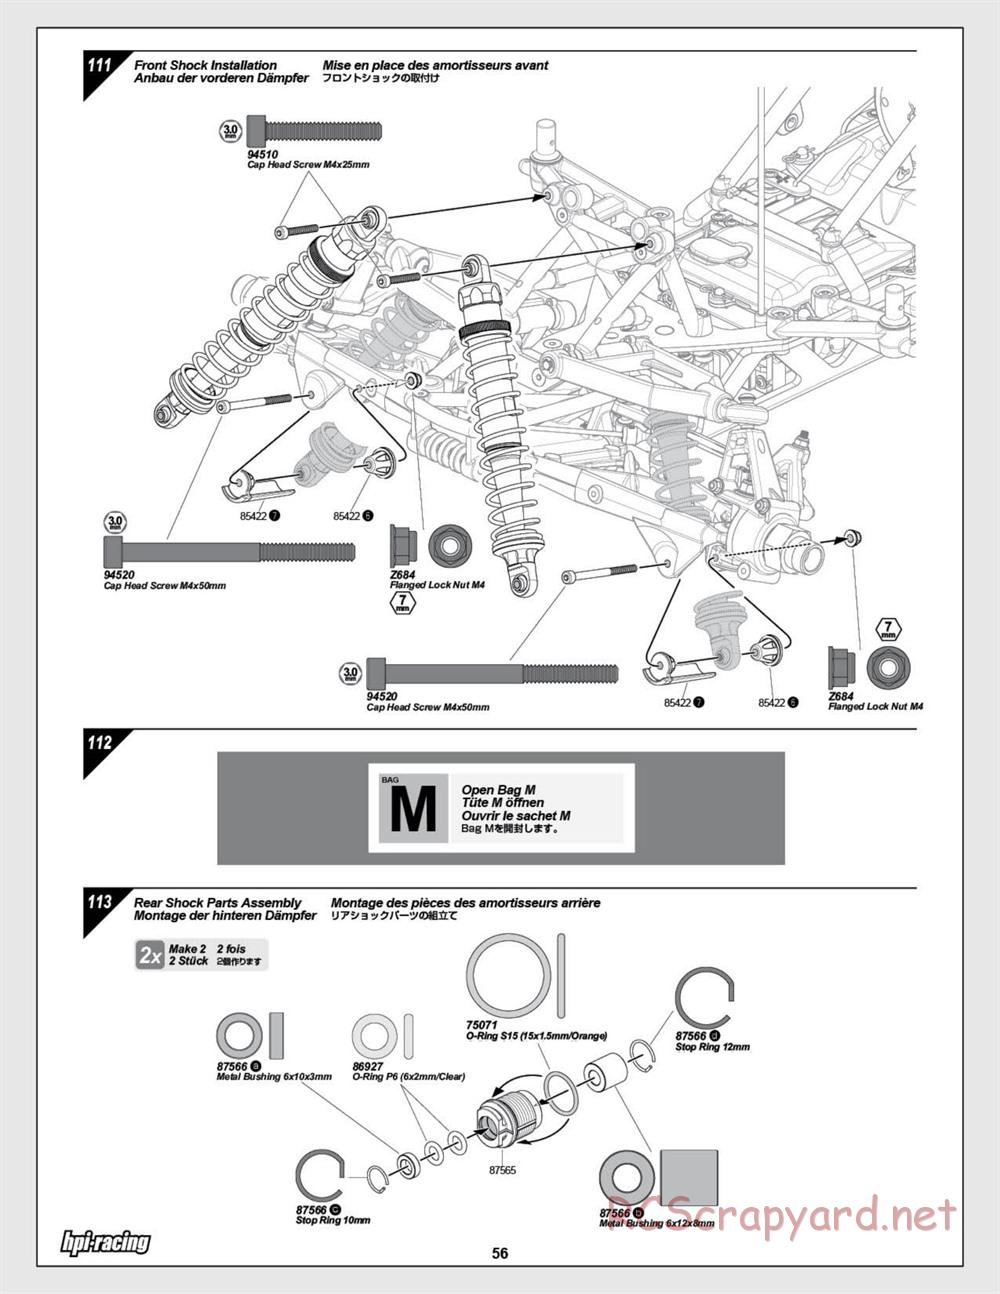 HPI - Baja 5SC SS - Exploded View - Page 56